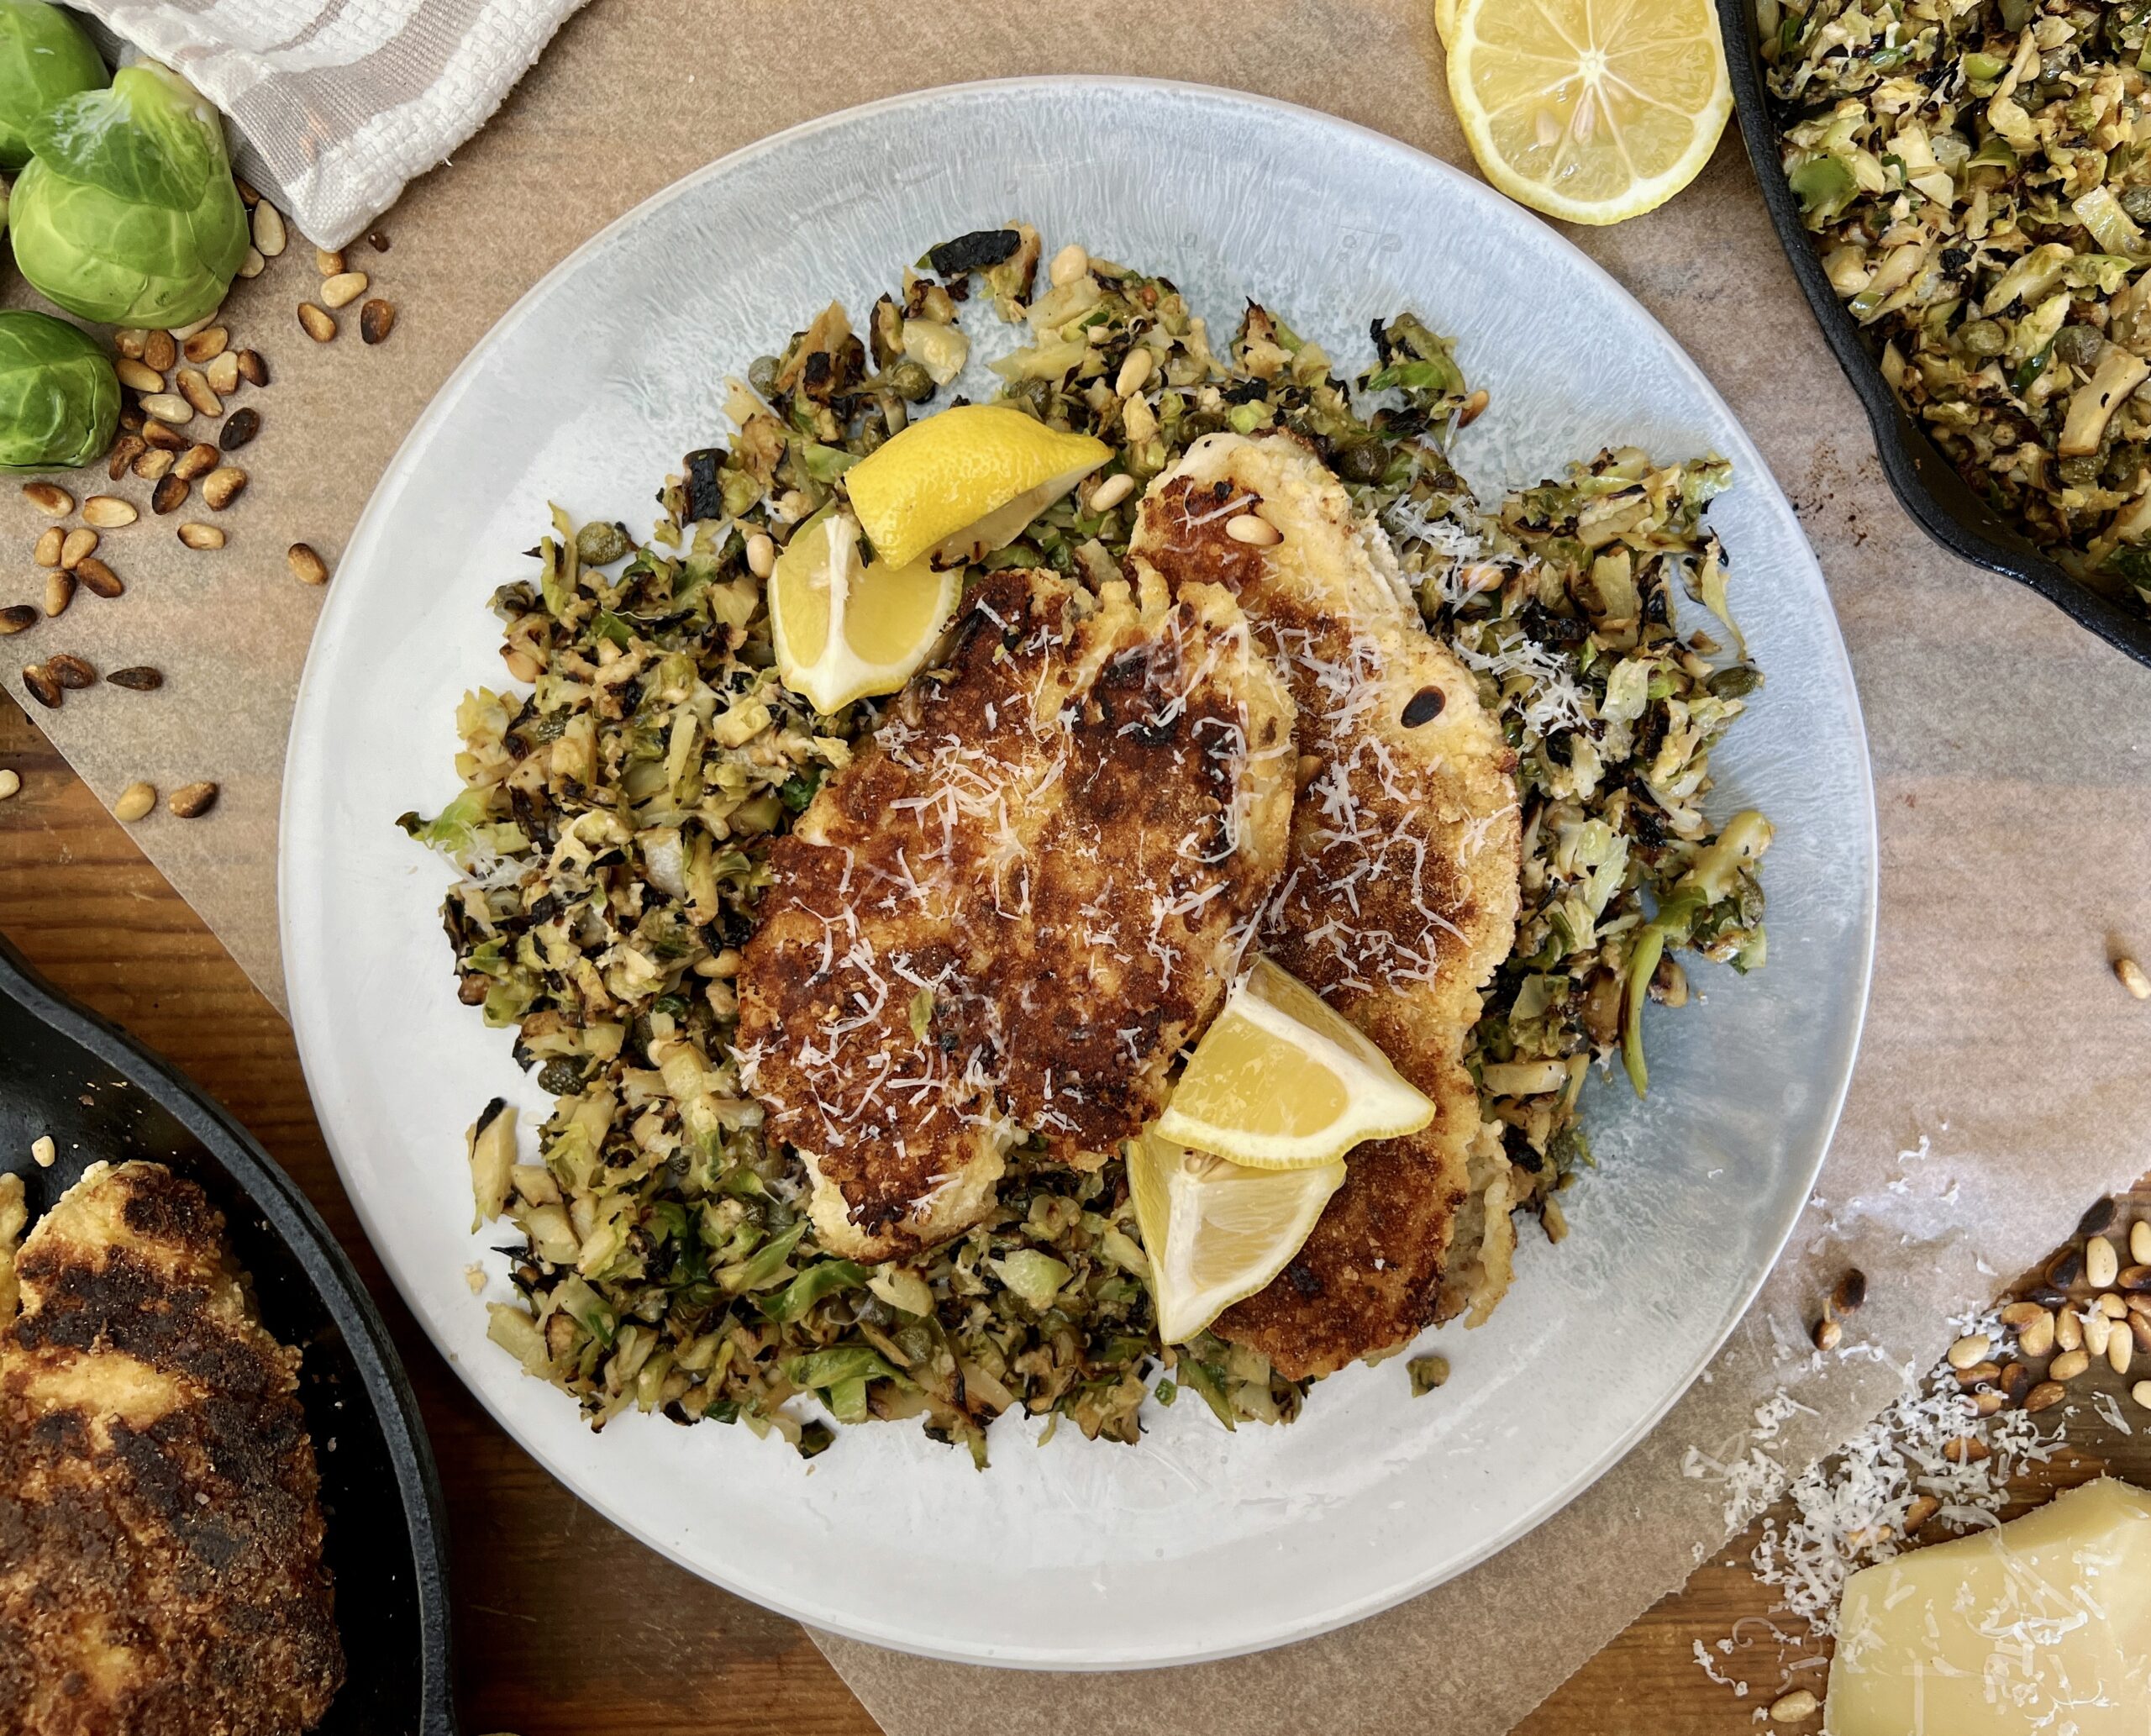 Juicy marinated, golden seared chicken on a simple parmesan briney brussels hash: this Crispy Chicken Over Lemon Caper Brussels is a burst of flavor!